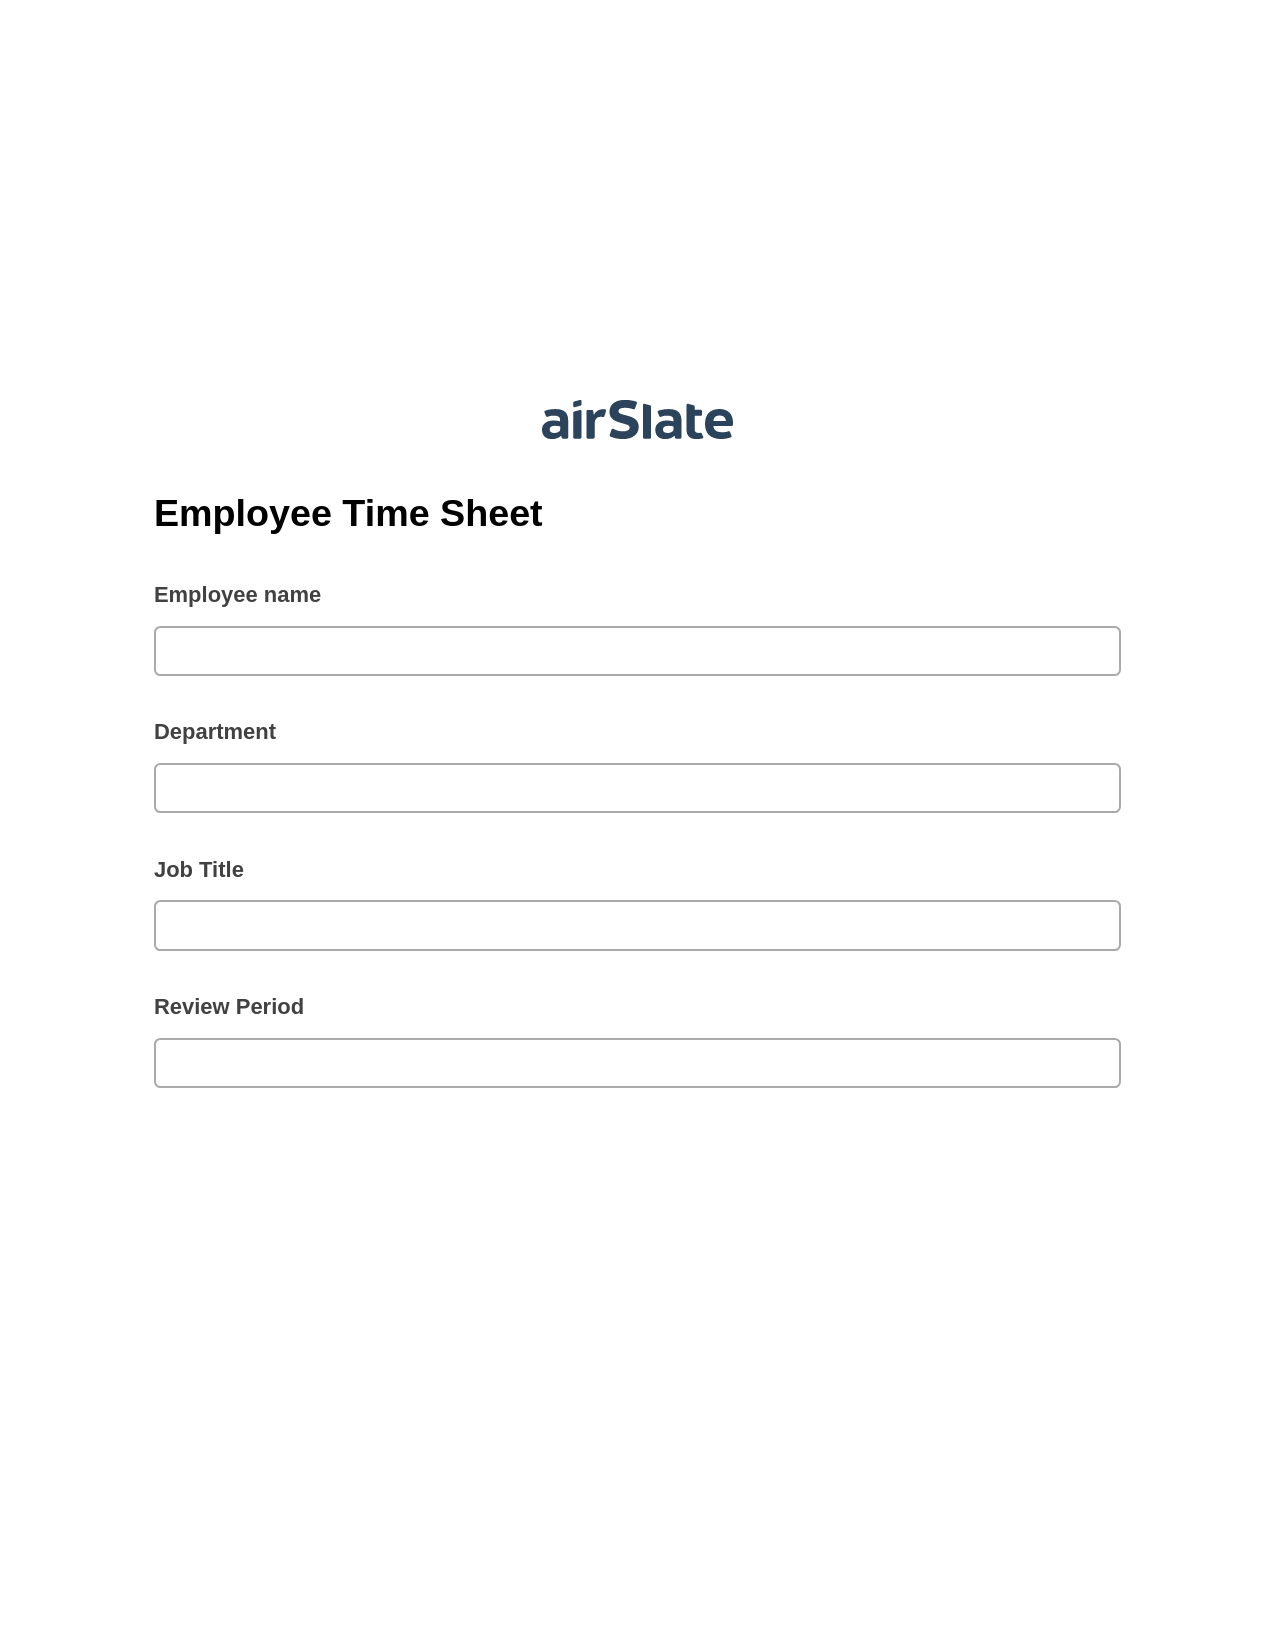 Employee Time Sheet Pre-fill from MS Dynamics 365 Records, Create Salesforce Records Bot, Post-finish Document Bot